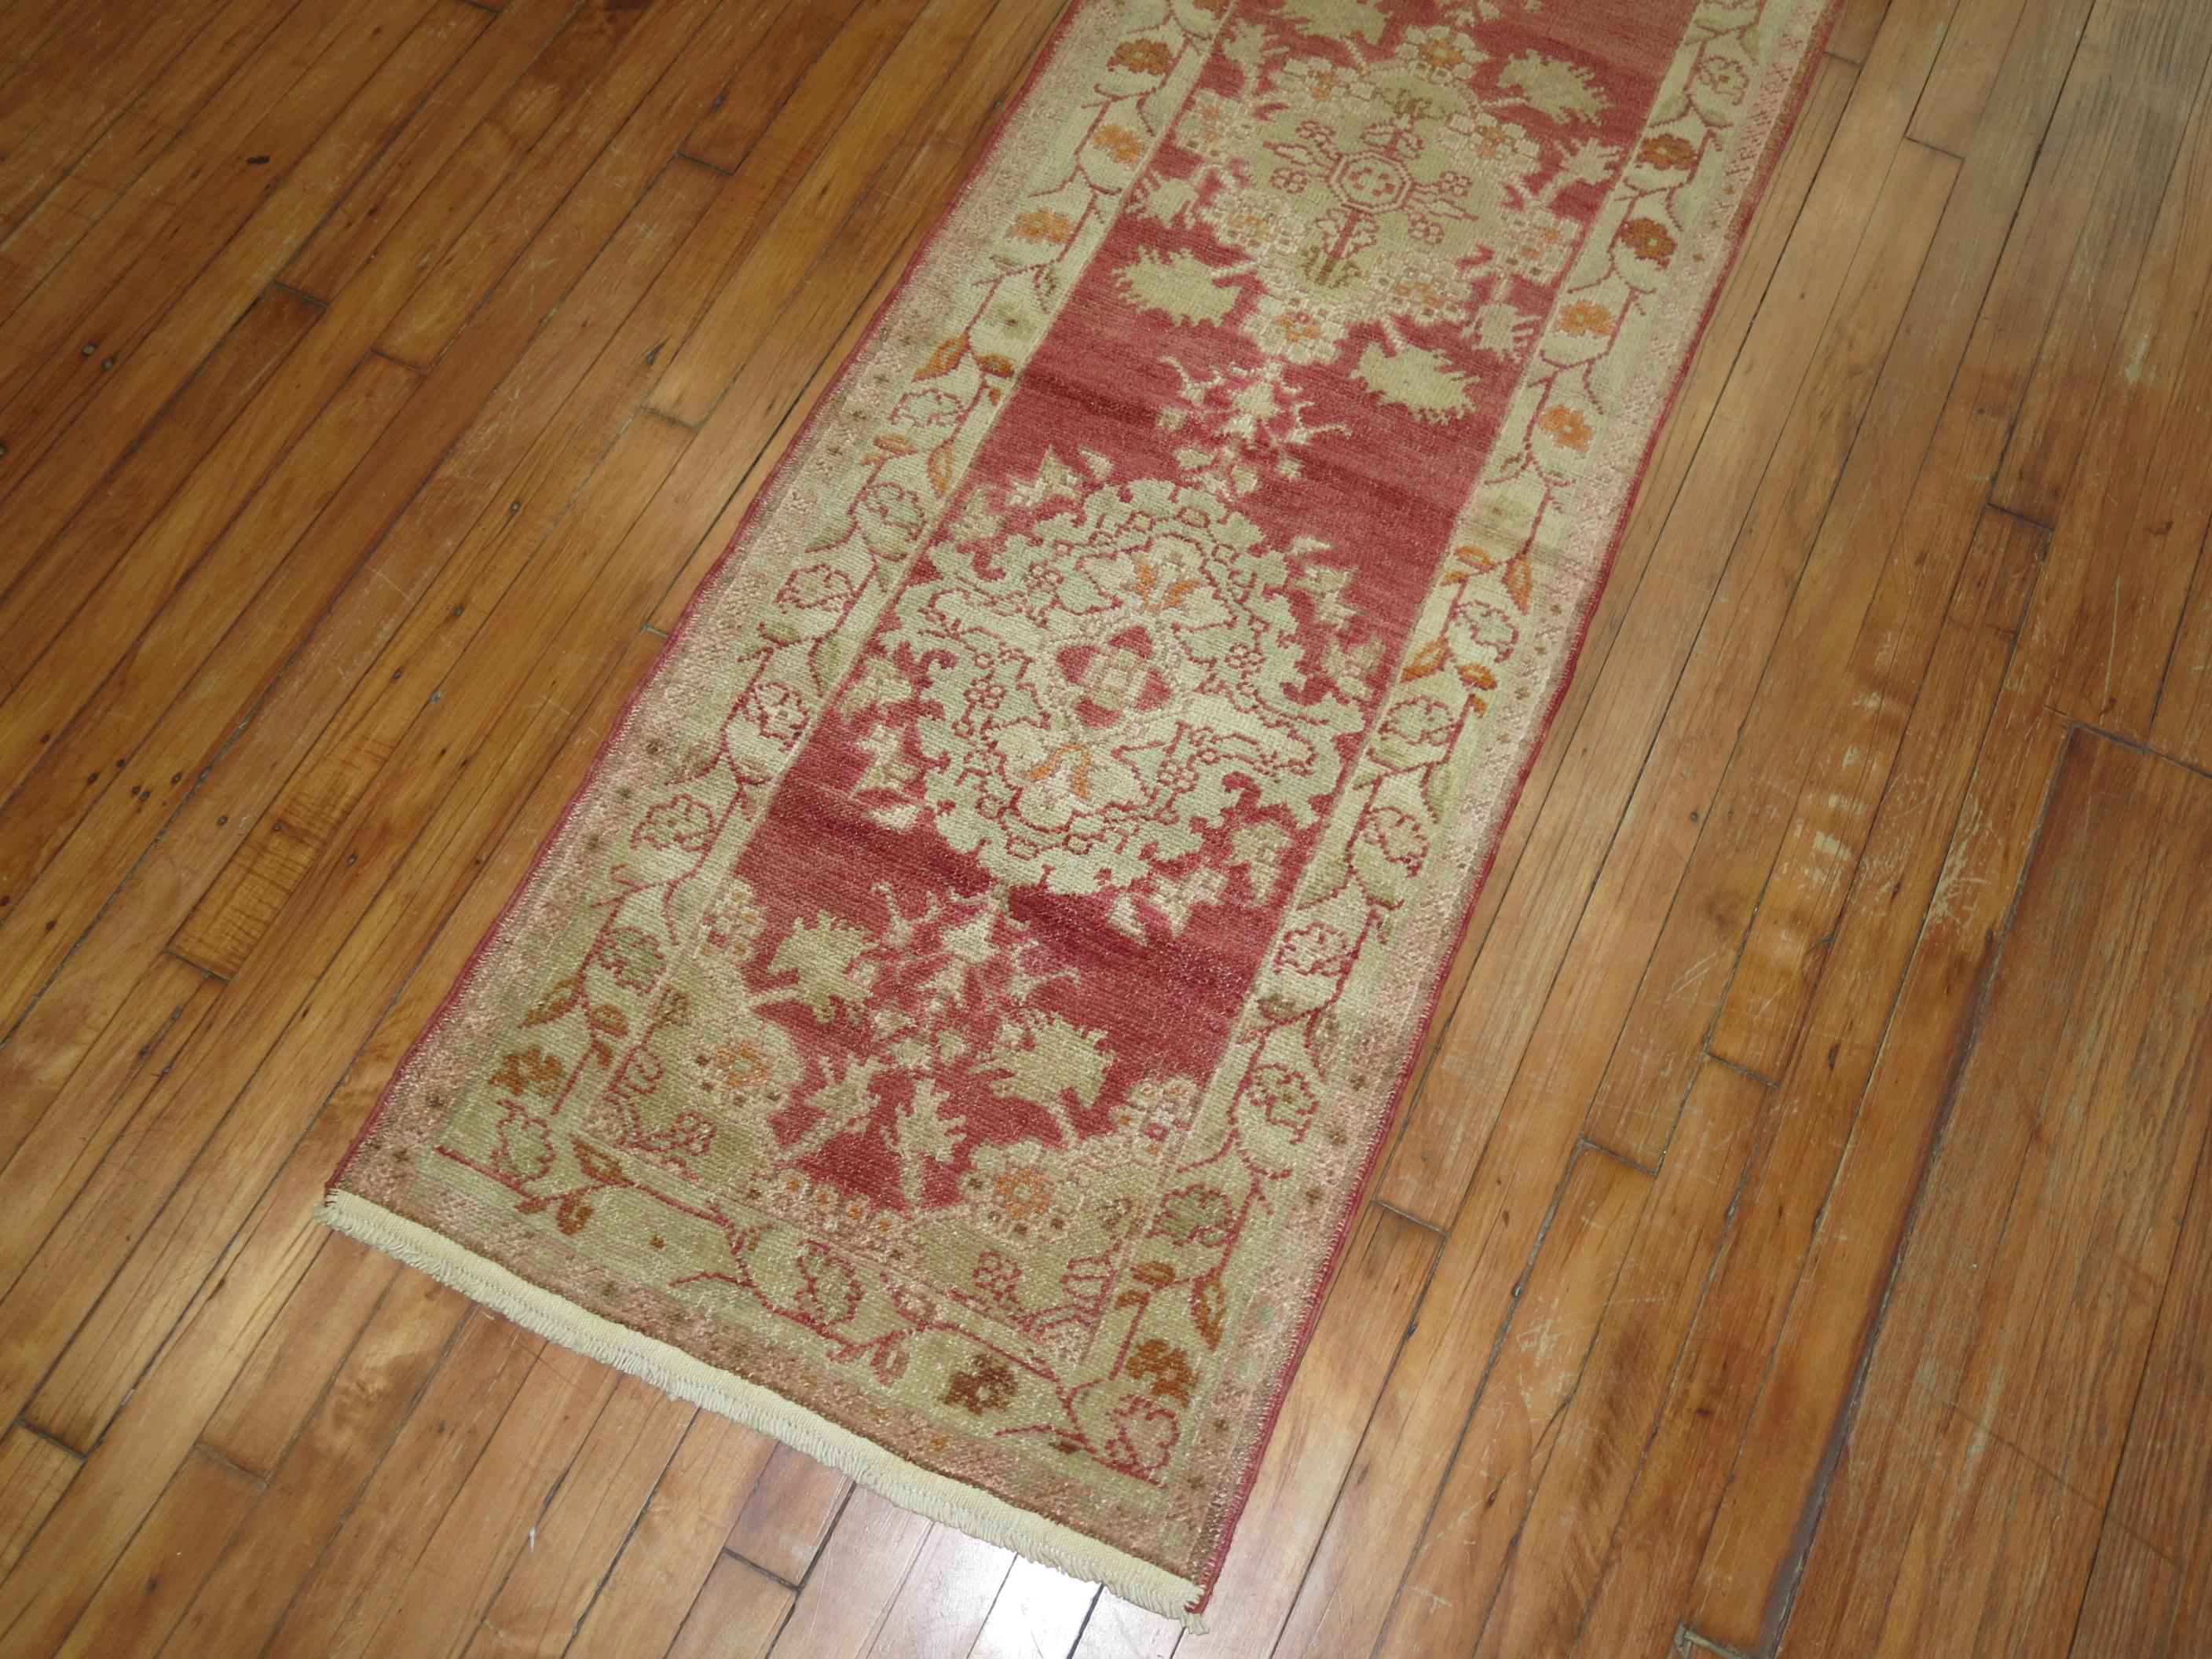 Mid-20th century red field Turkish runner with an all-over repetitive medallion design.

Measures: 2'1” x 11'9”.